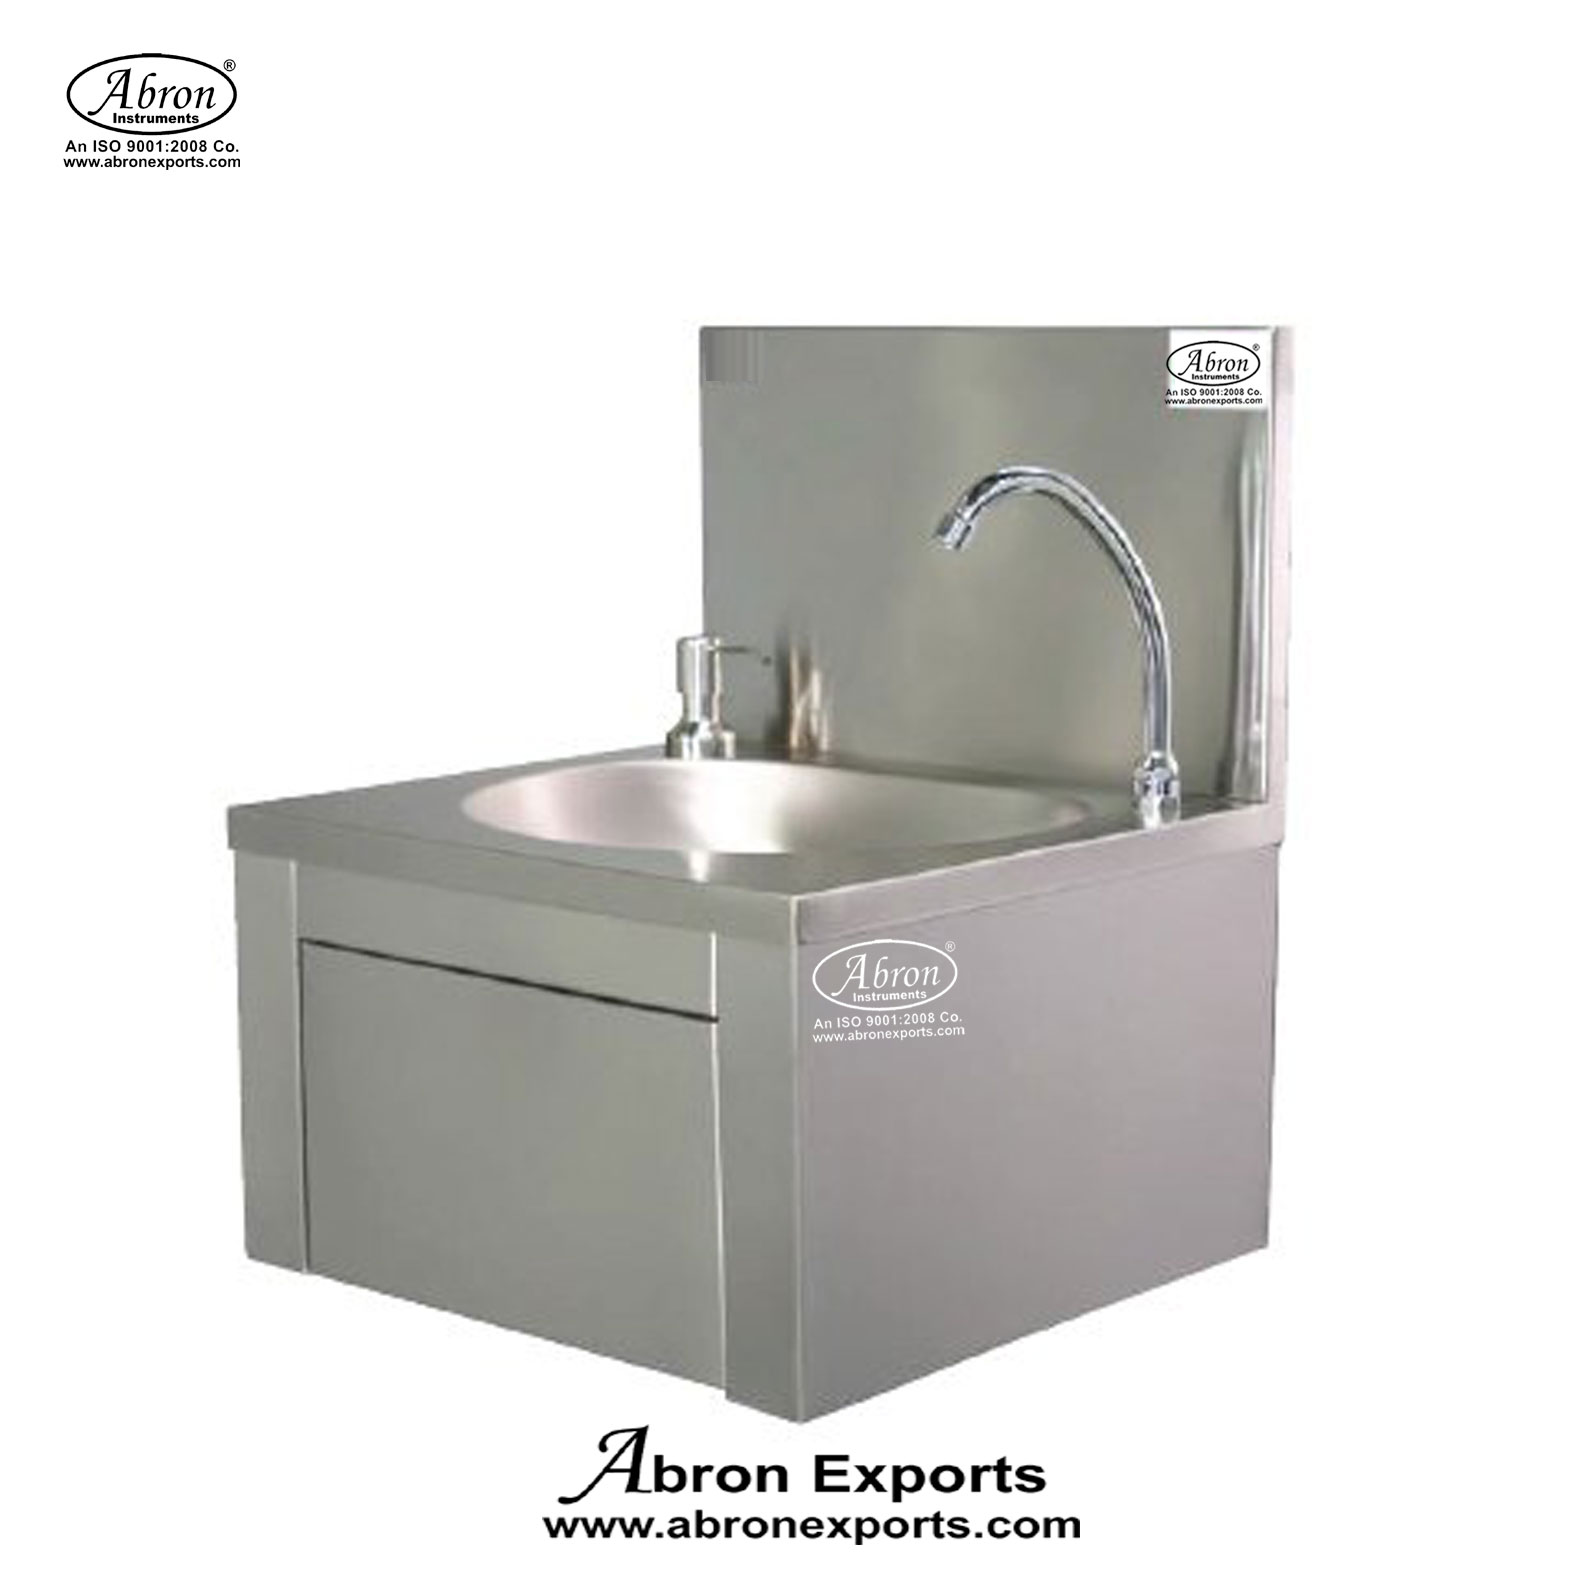 Surgical Hospital Furniture Knee Operated Hand Wash Sink With Soap Dispenser Abron ABM-3590-89B